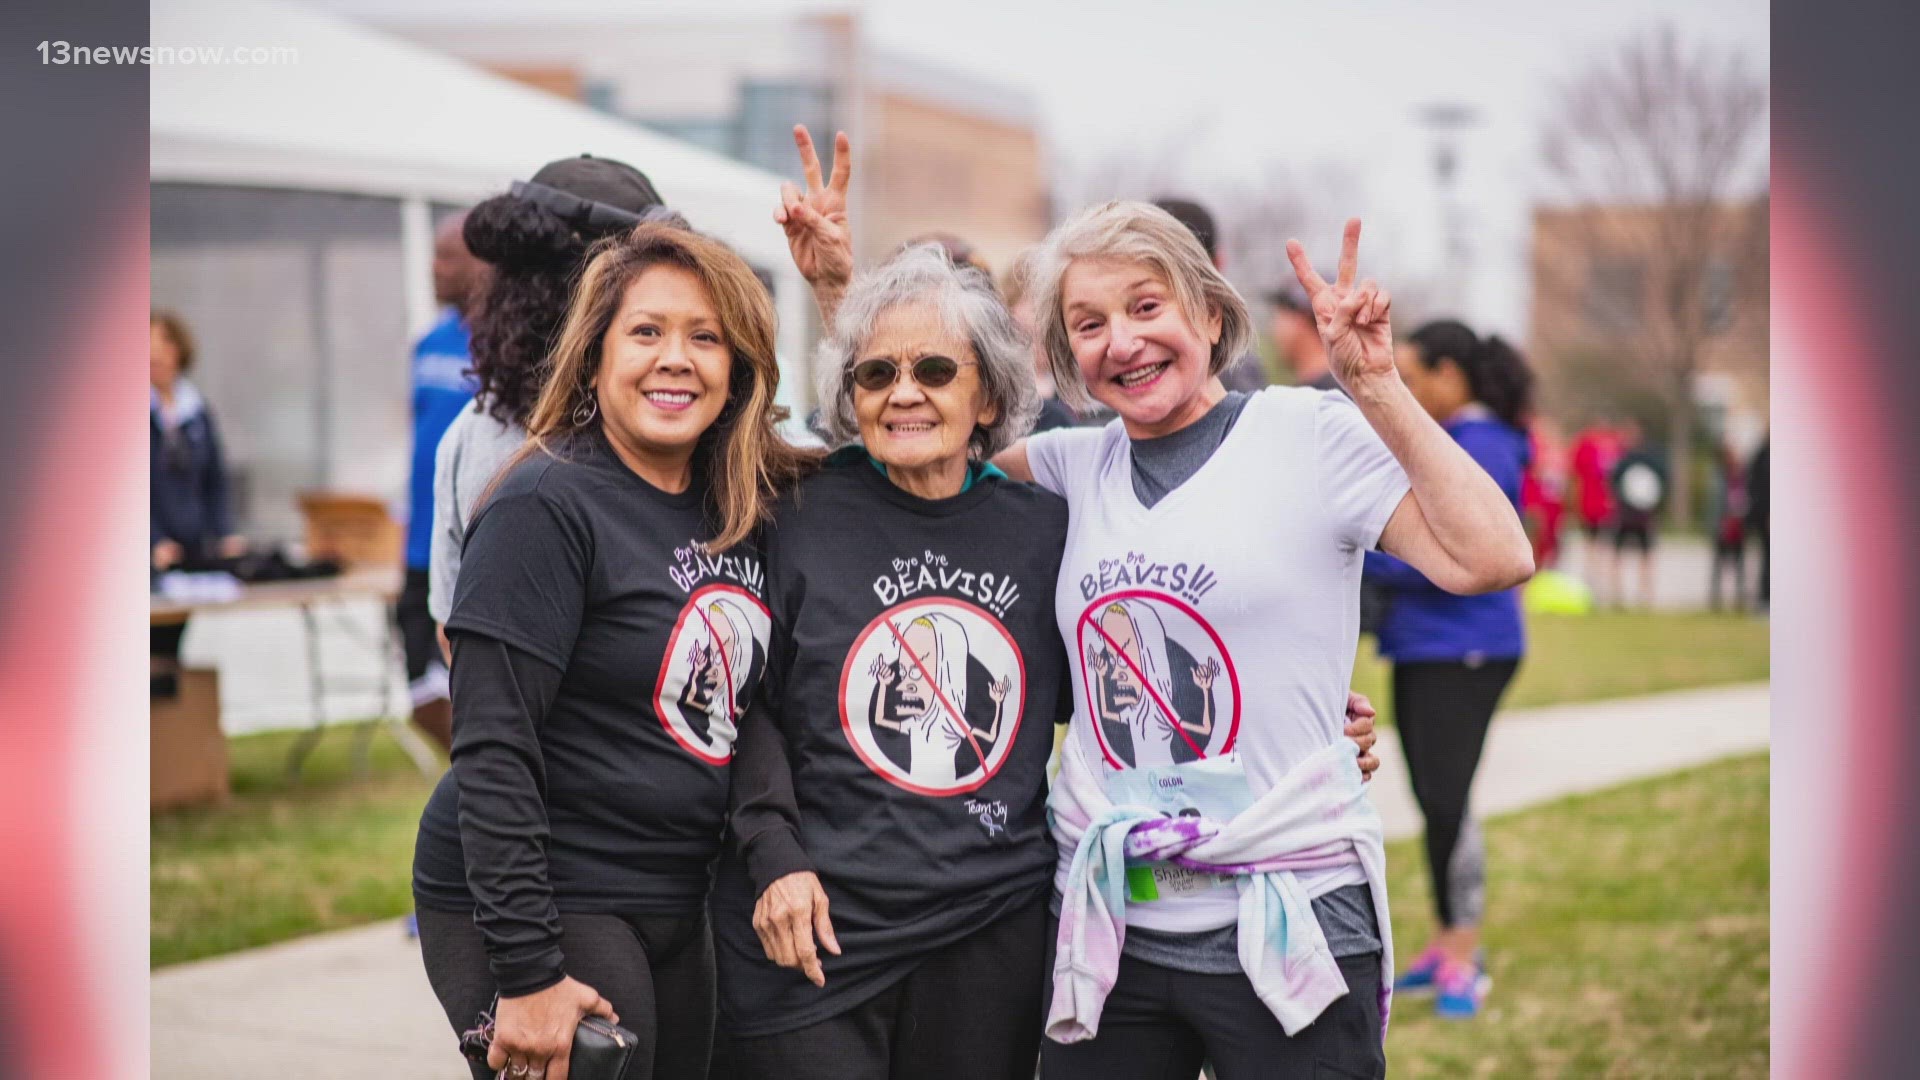 In honor of Colorectal Cancer Awareness Month, nearly 400 runners will participate in an event to raise awareness about prevention, and honor survivors.